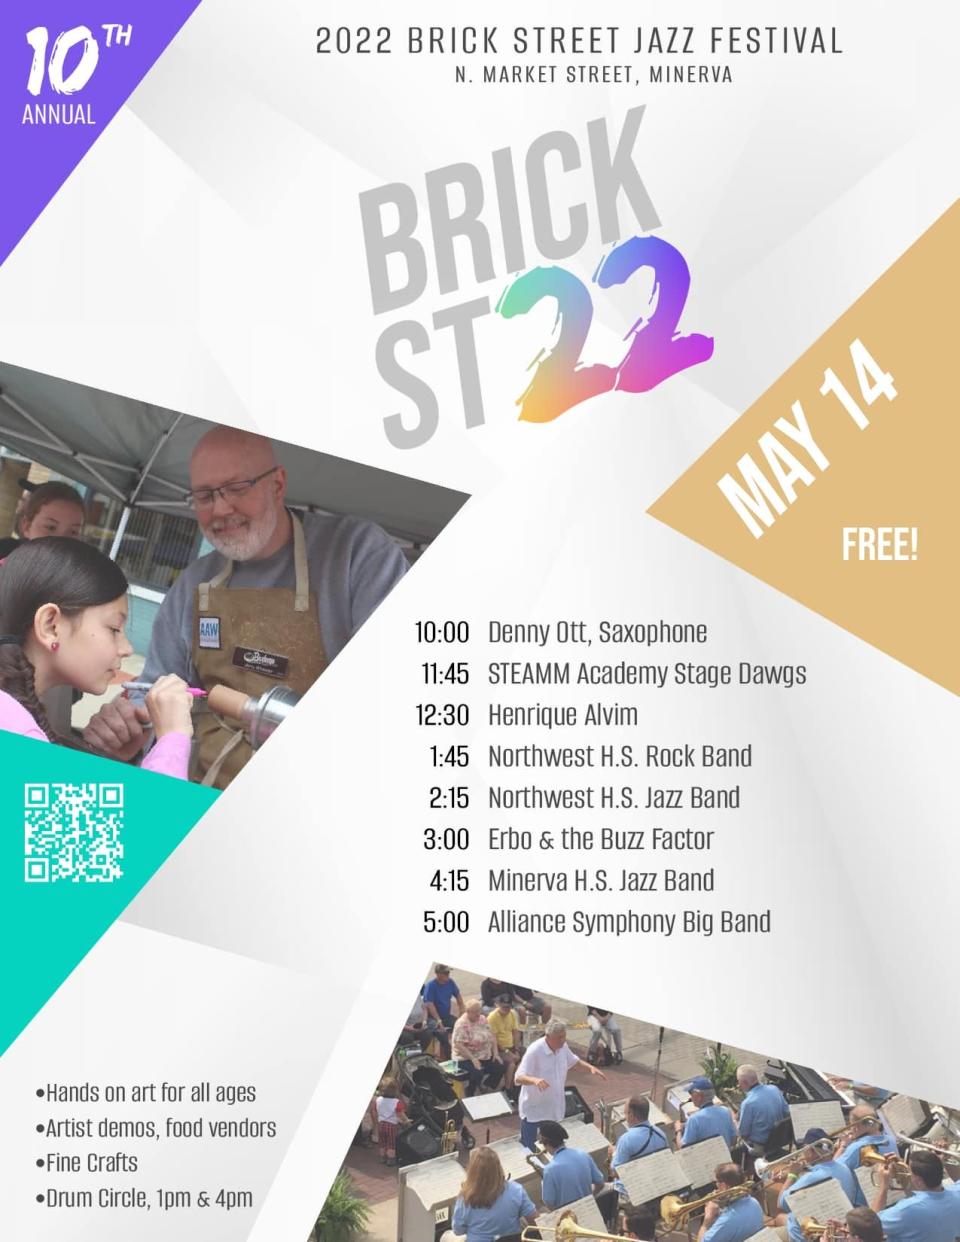 The 10th annual Brick Street Art & Jazz Festival is Saturday in Minerva. Music starts at 10 a.m. Food and art activities are featured.